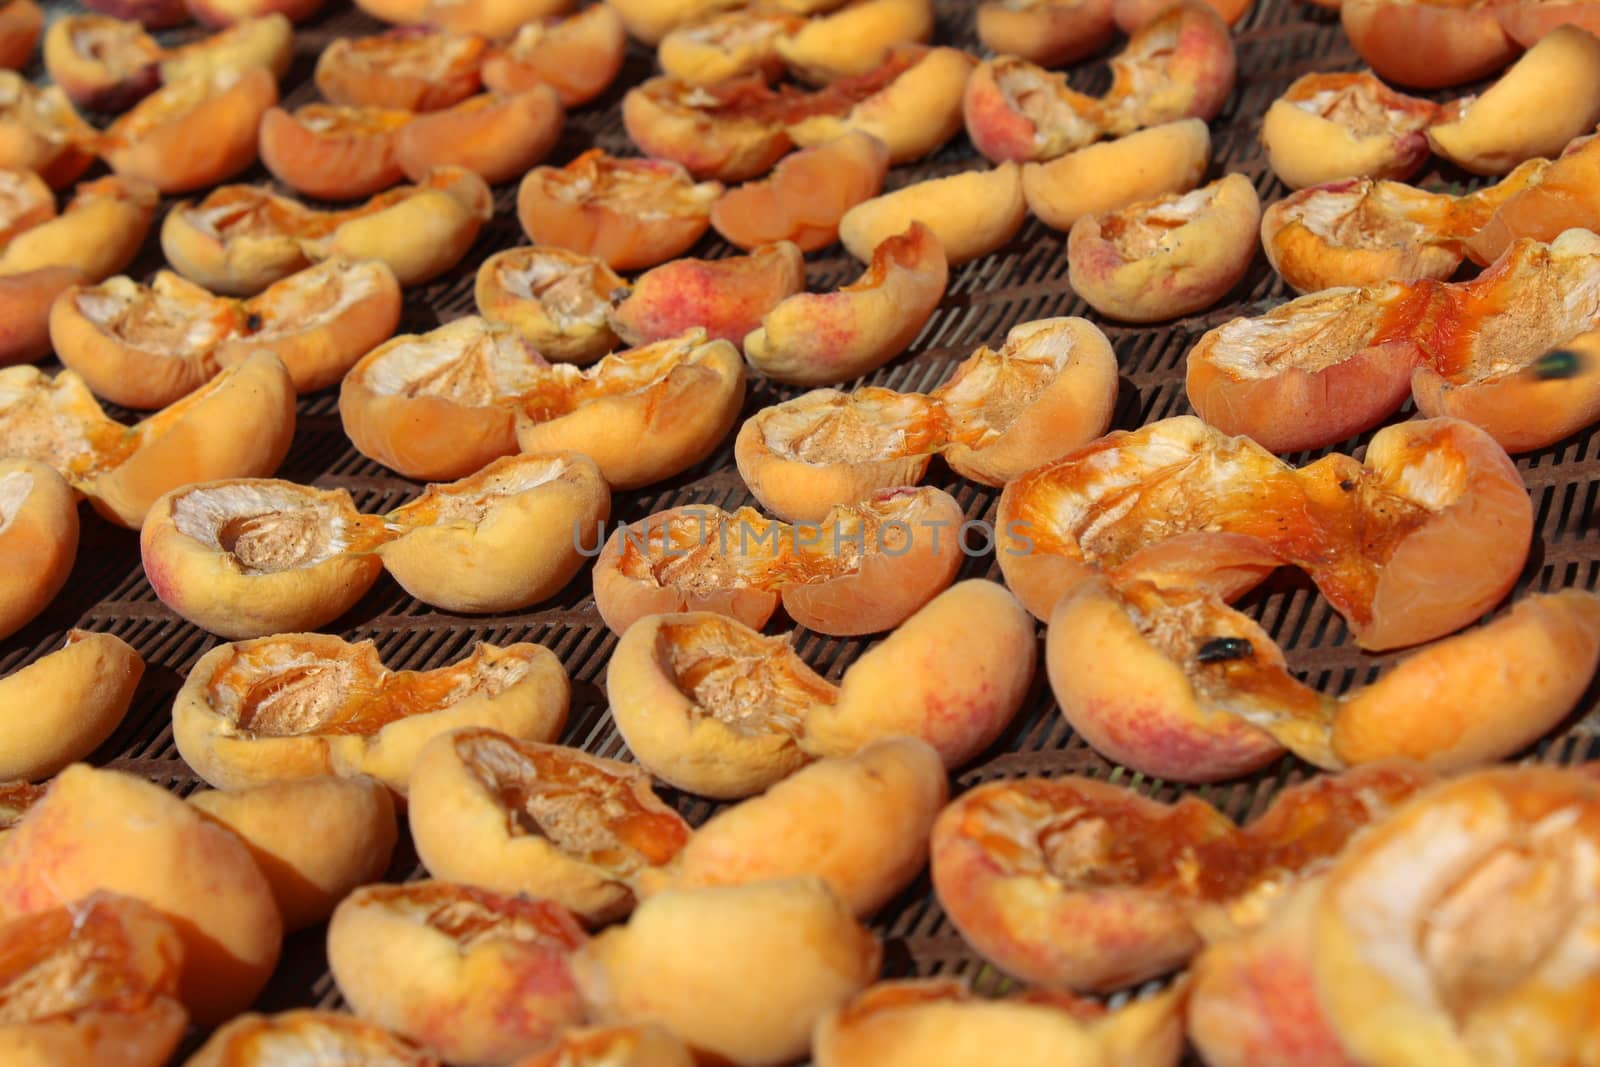 Drying apricots in direct sunlight in a rural environment.